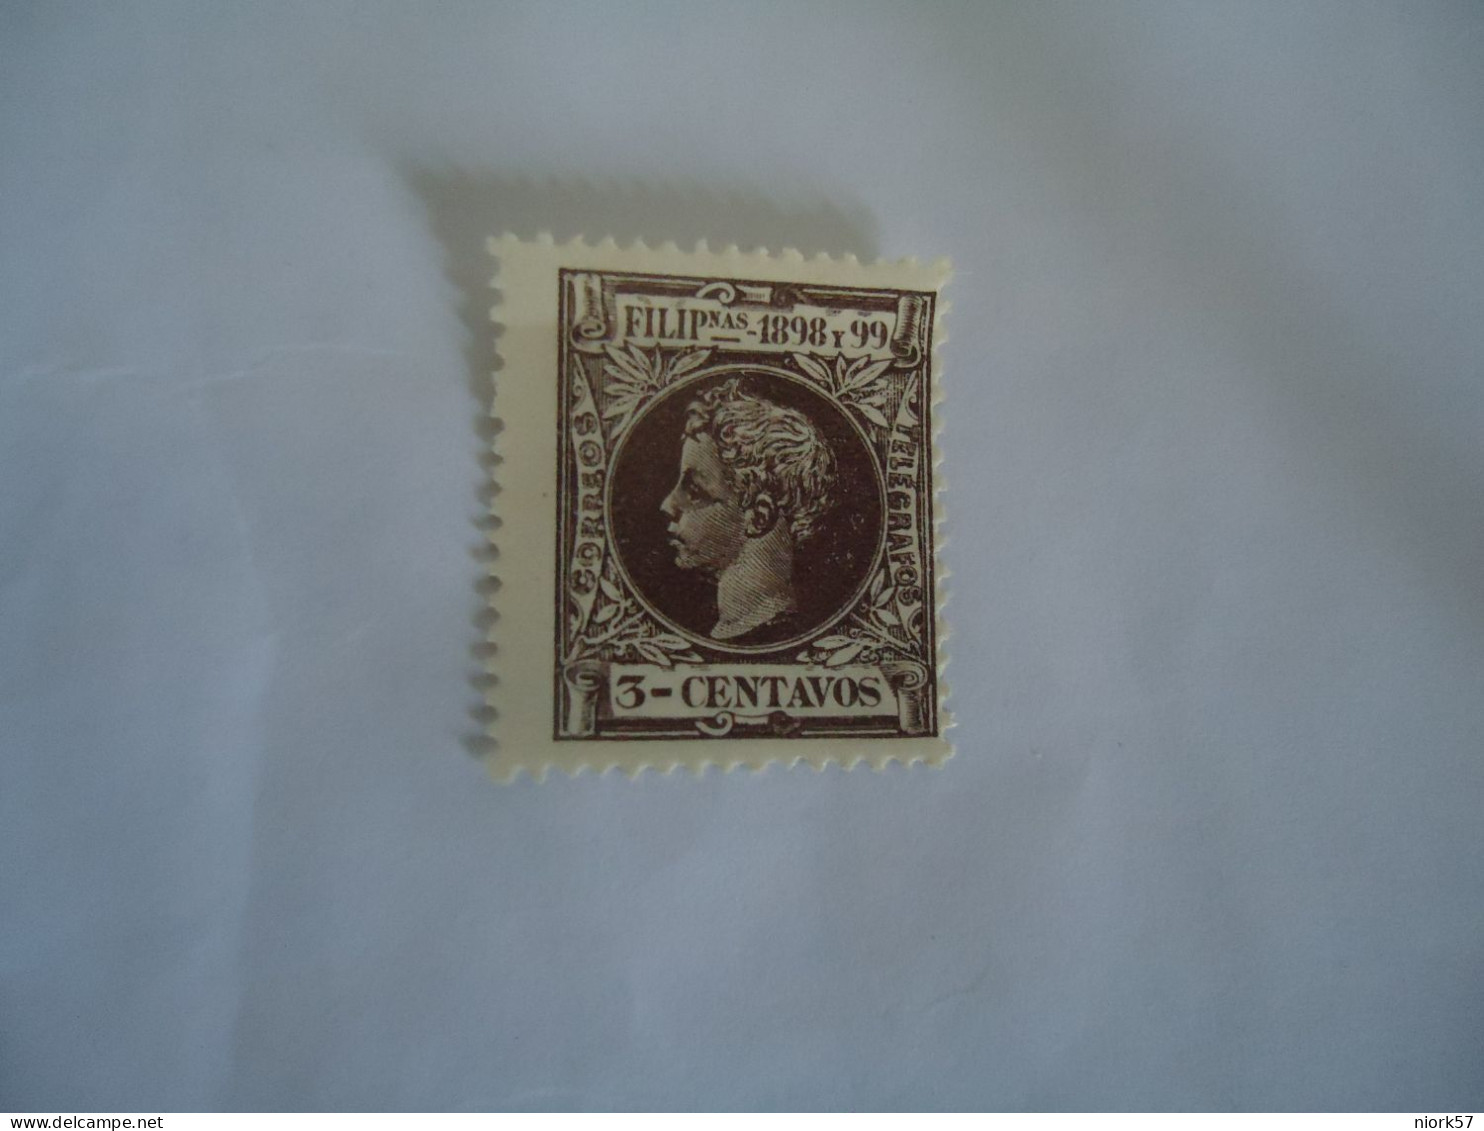 PHILIPPINES  MLN STAMPS KINGS 1898 - Filippine